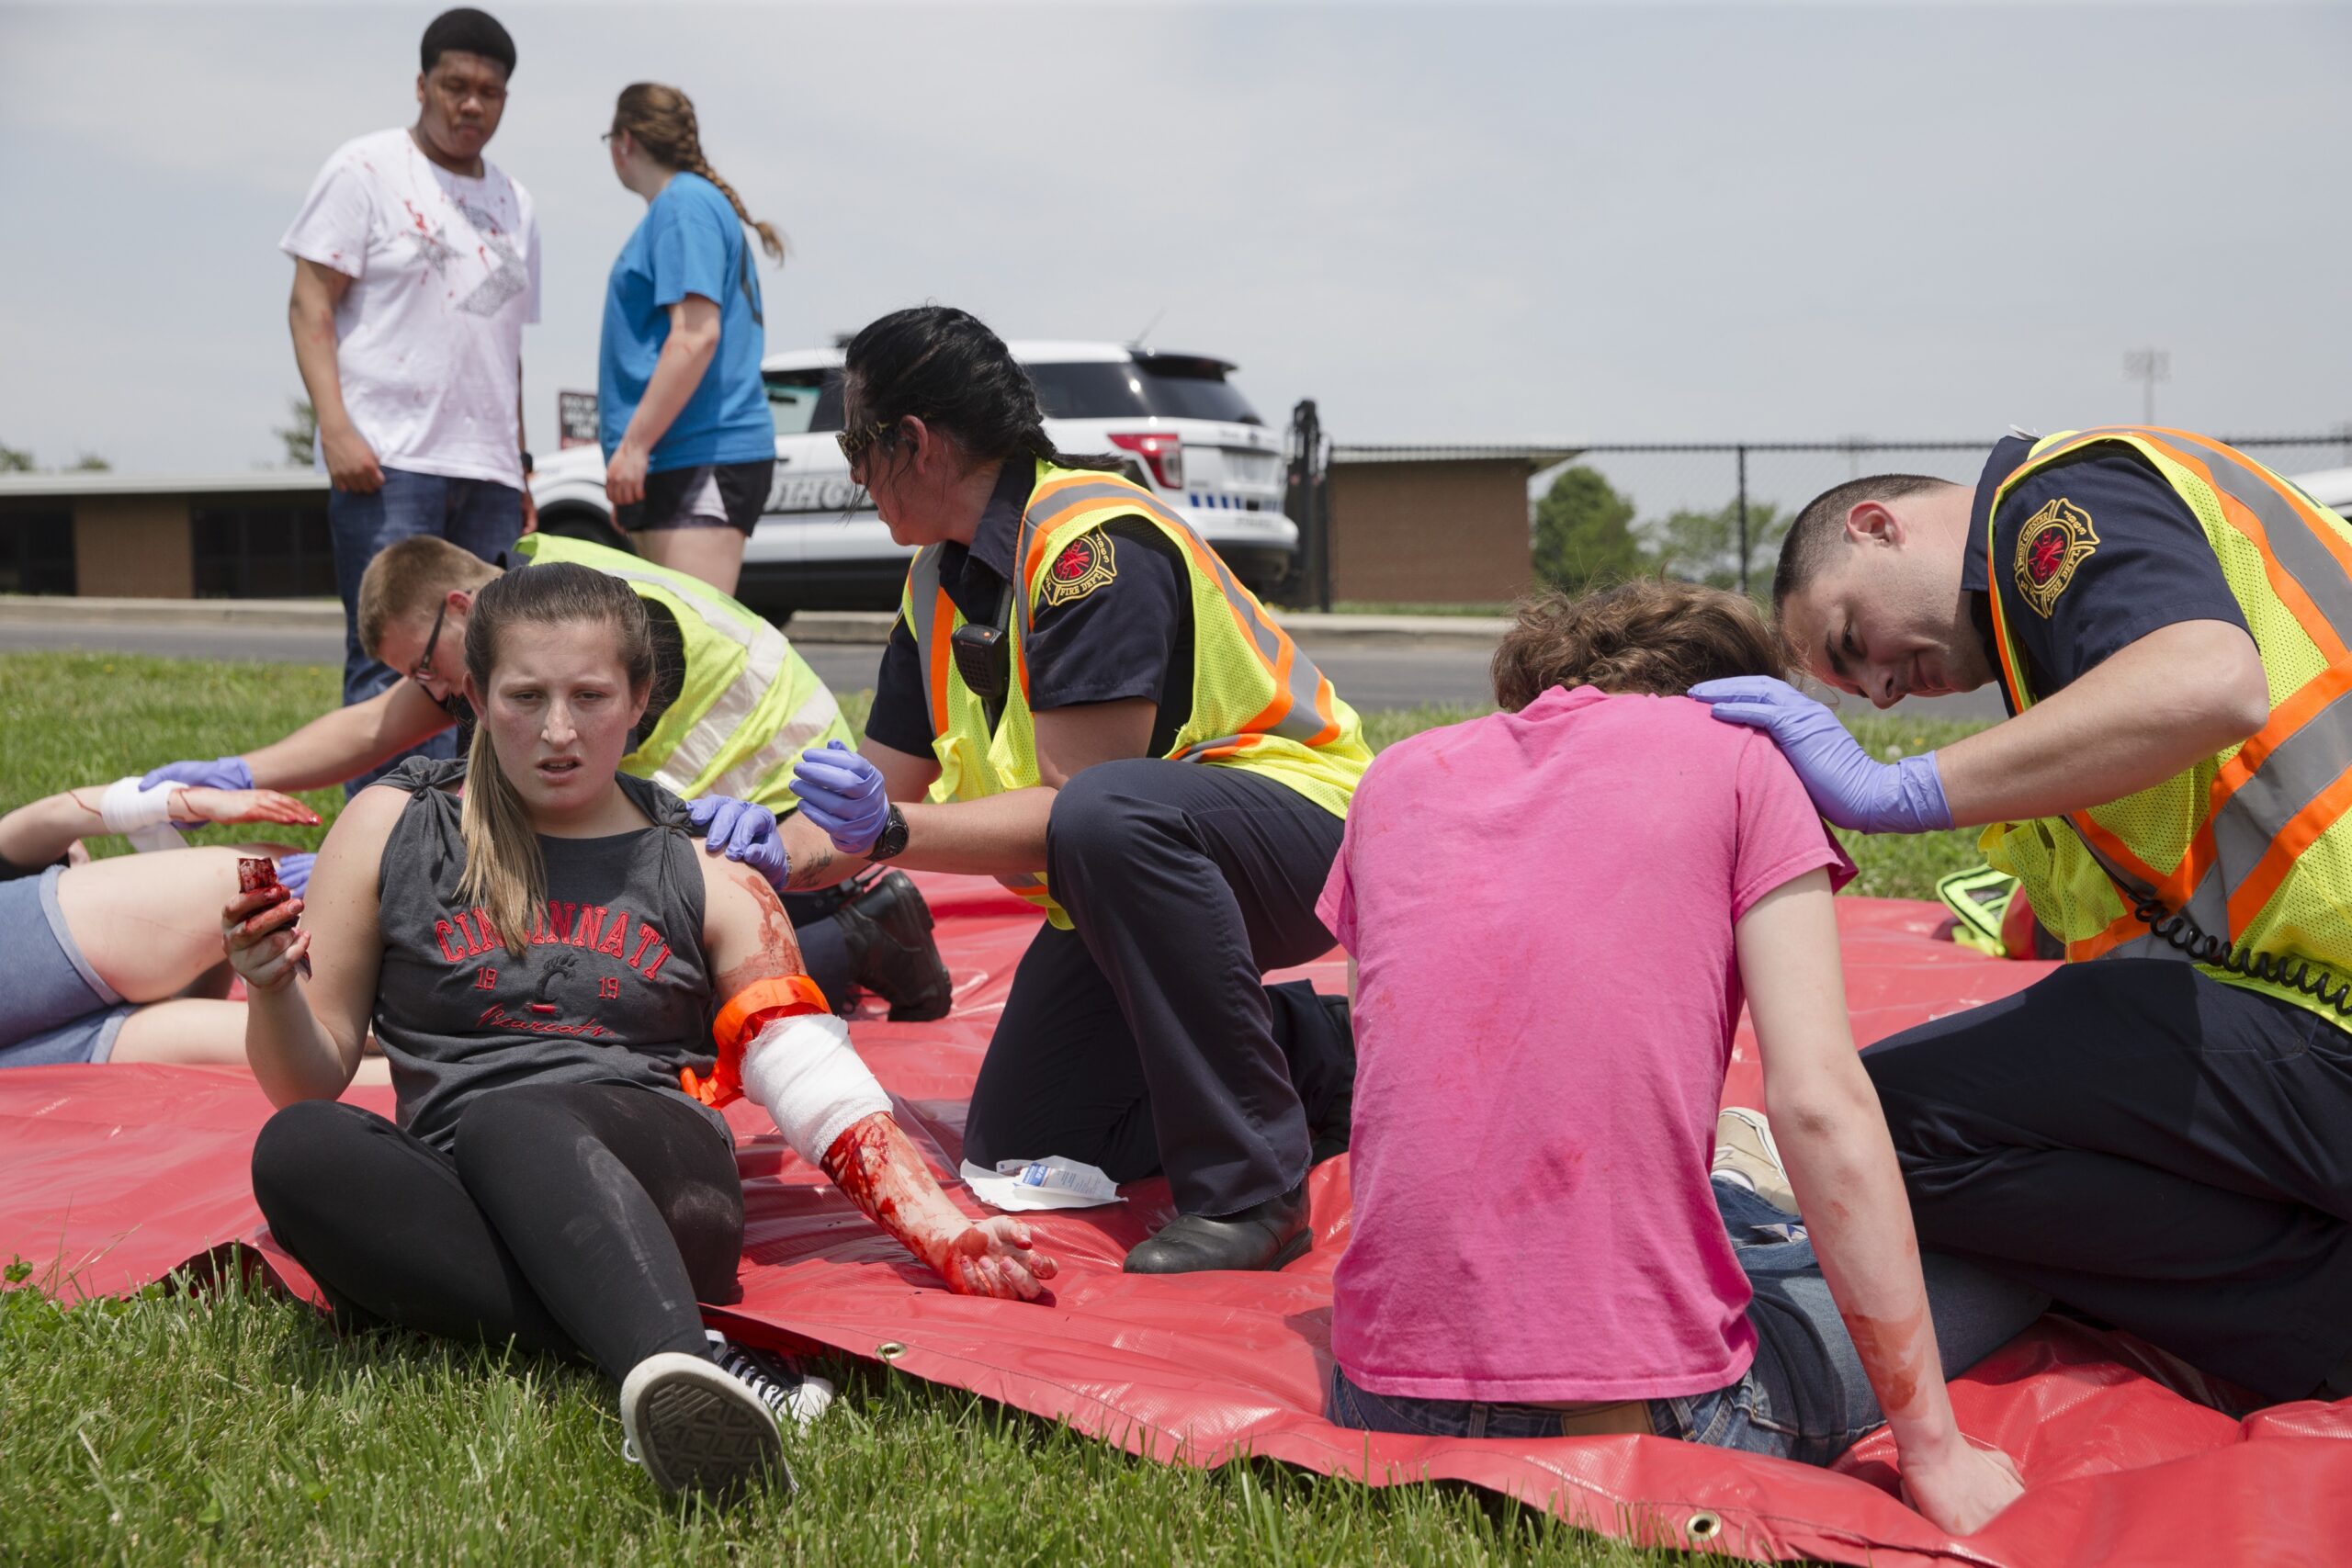 Volunteers stage injuries during active shooter simulation